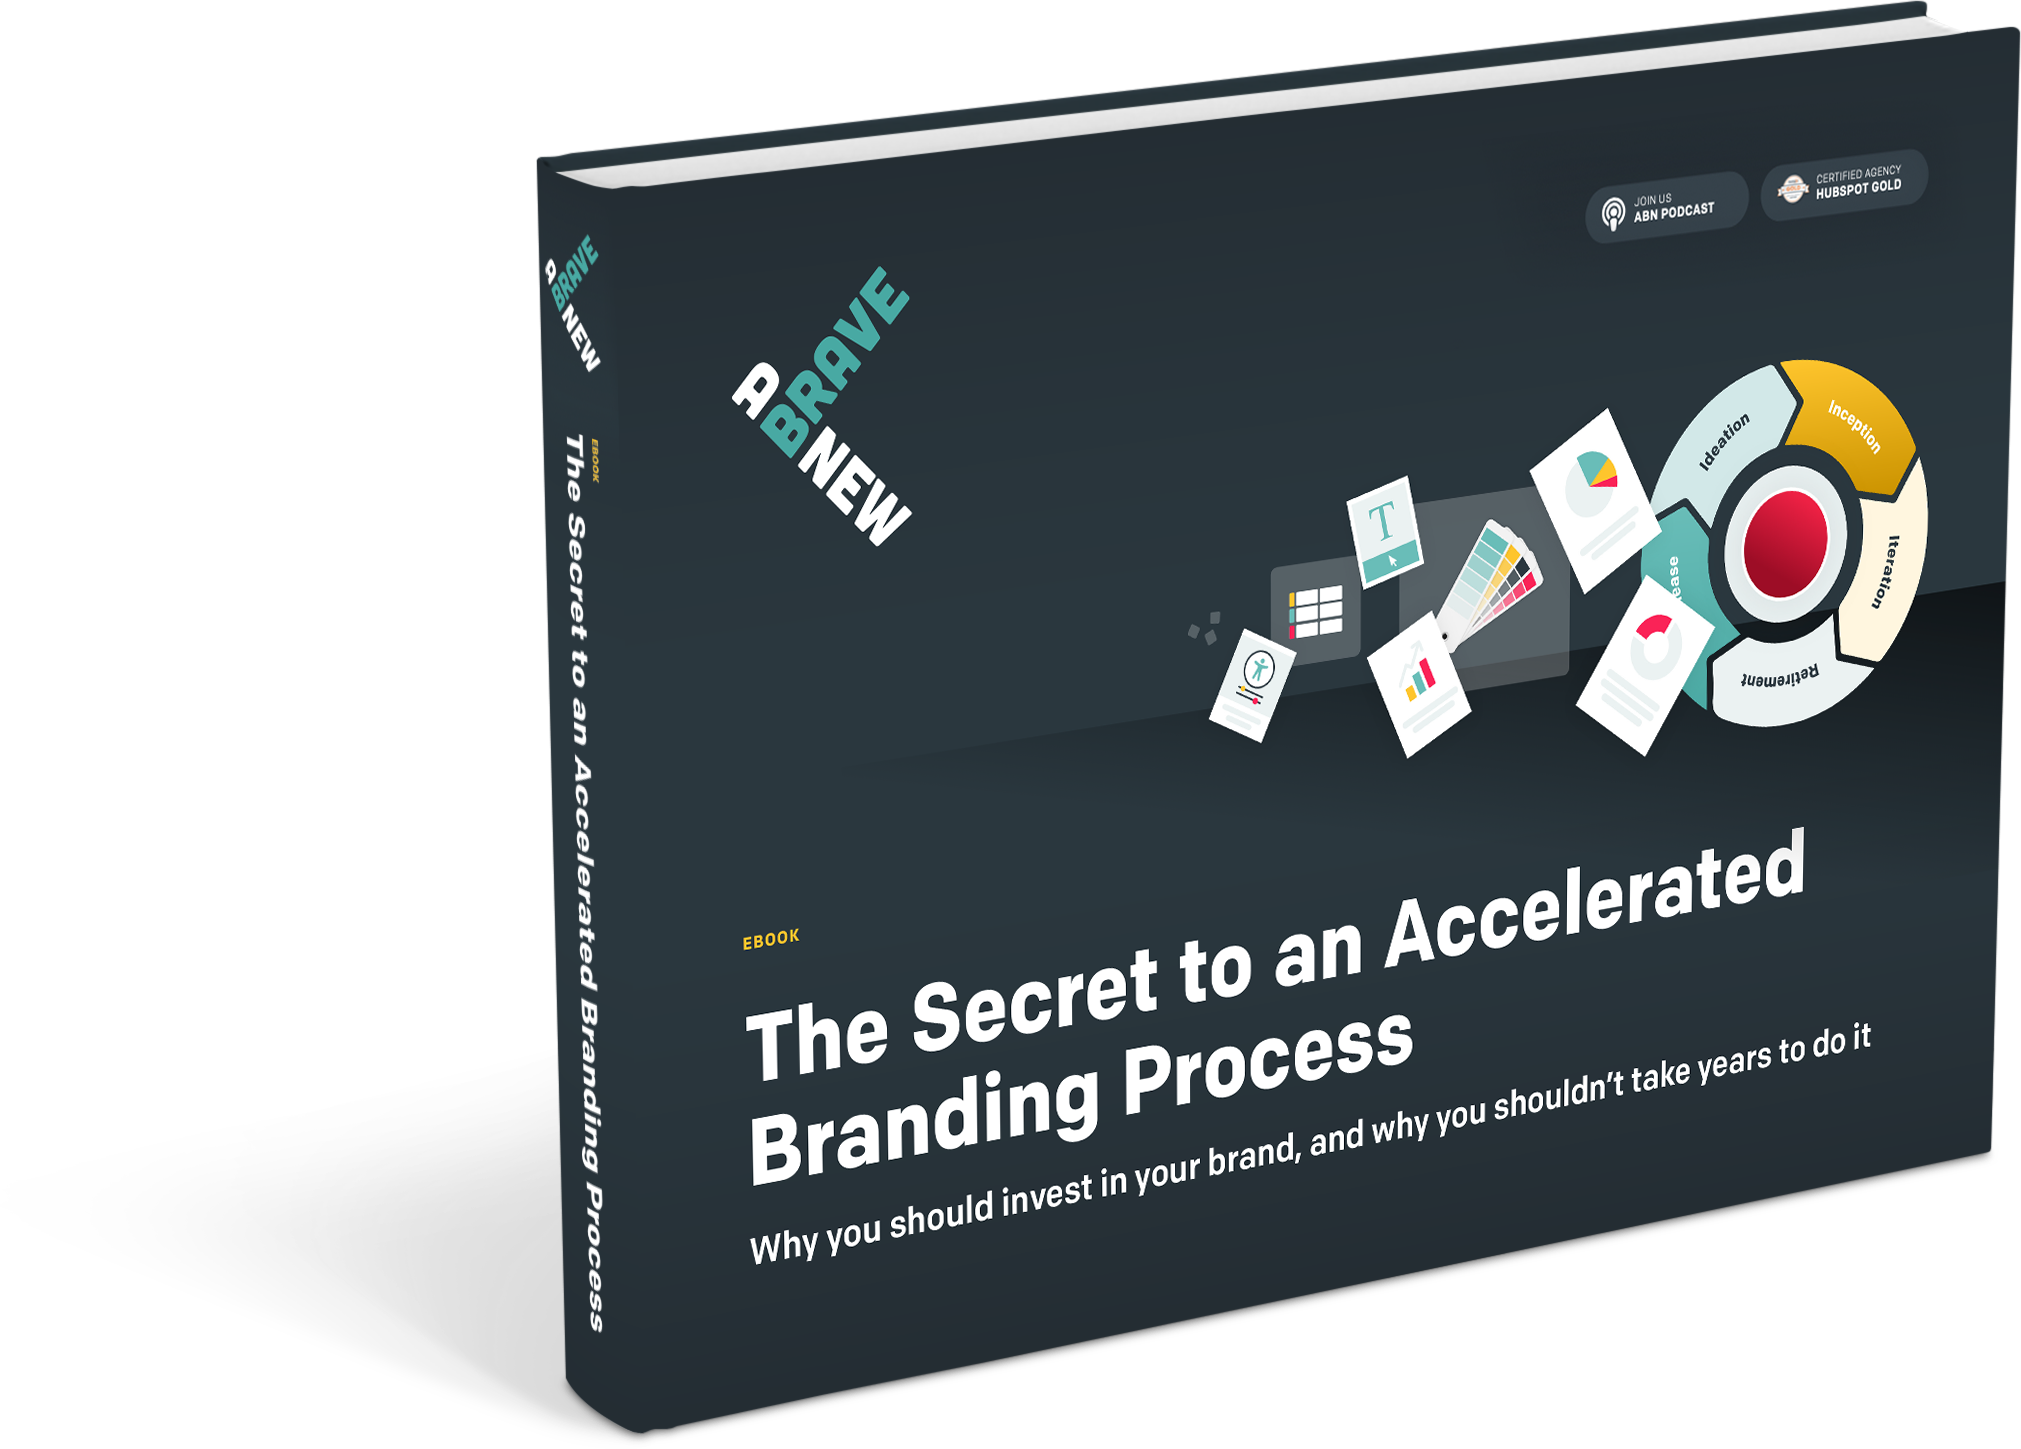 abn_accelerated_branding_ebook2